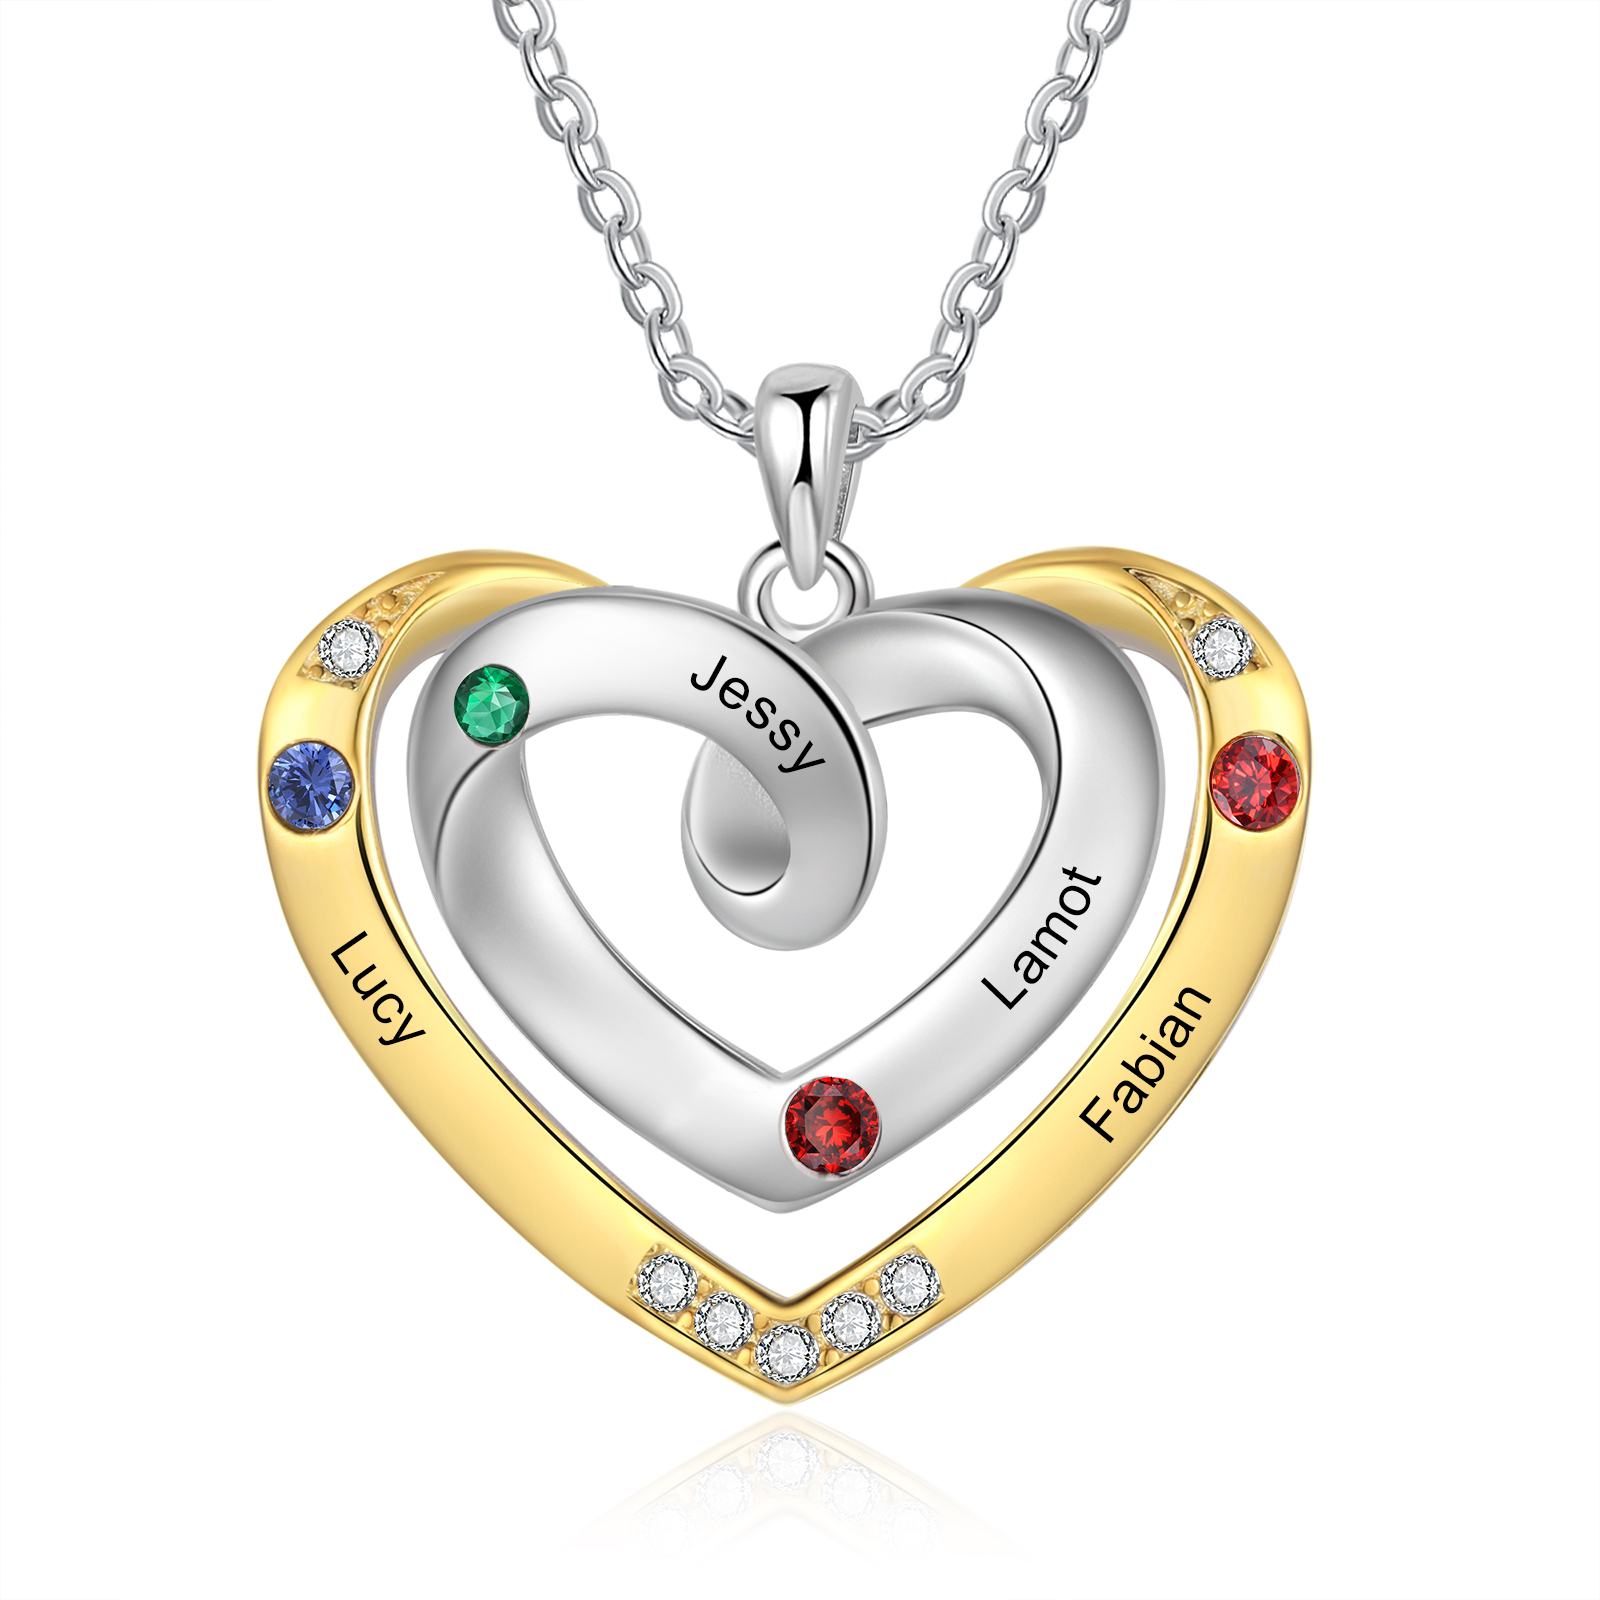 4 Names - Personalized Heart Necklace with Customized Names and Births